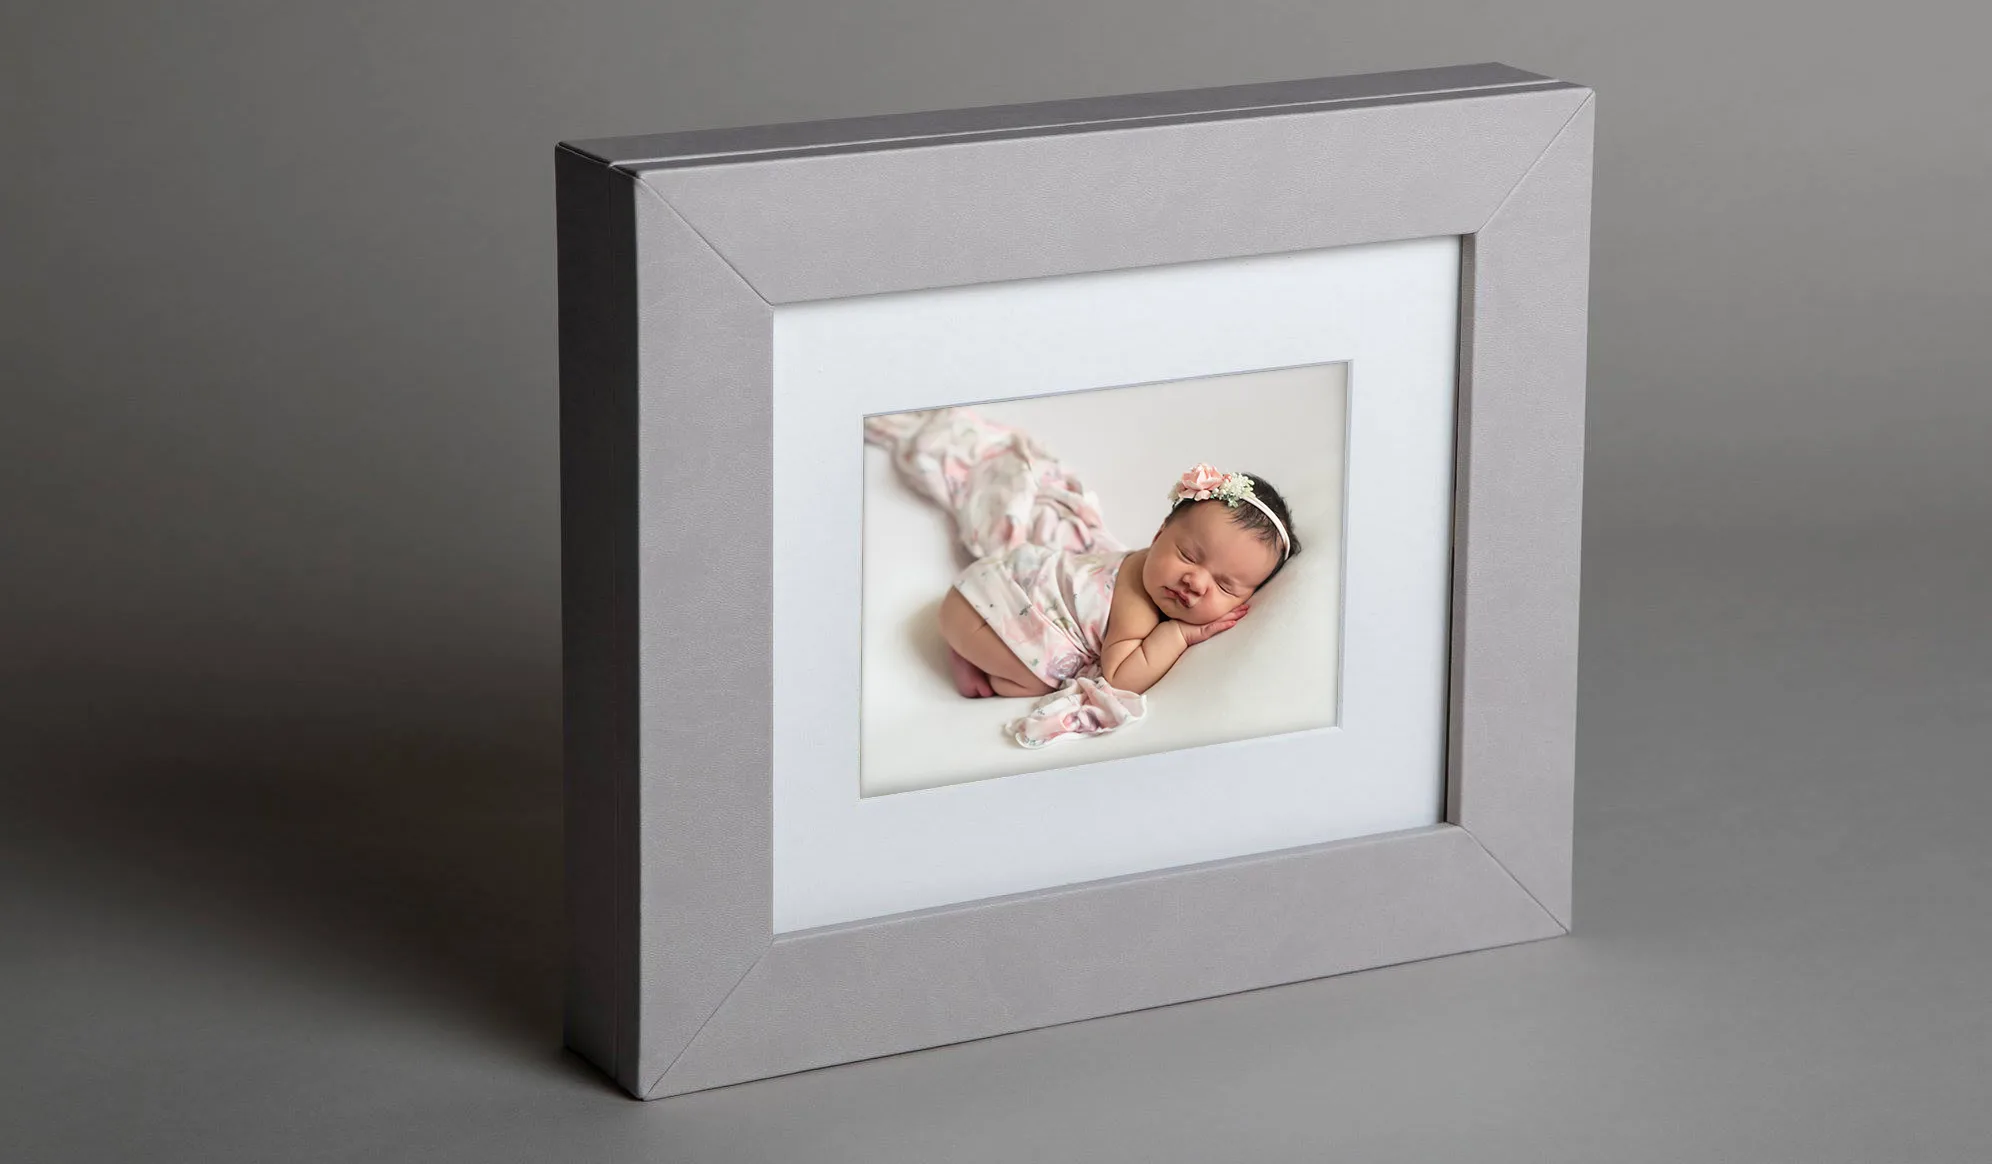 A grey frame with a photo of a baby in it.